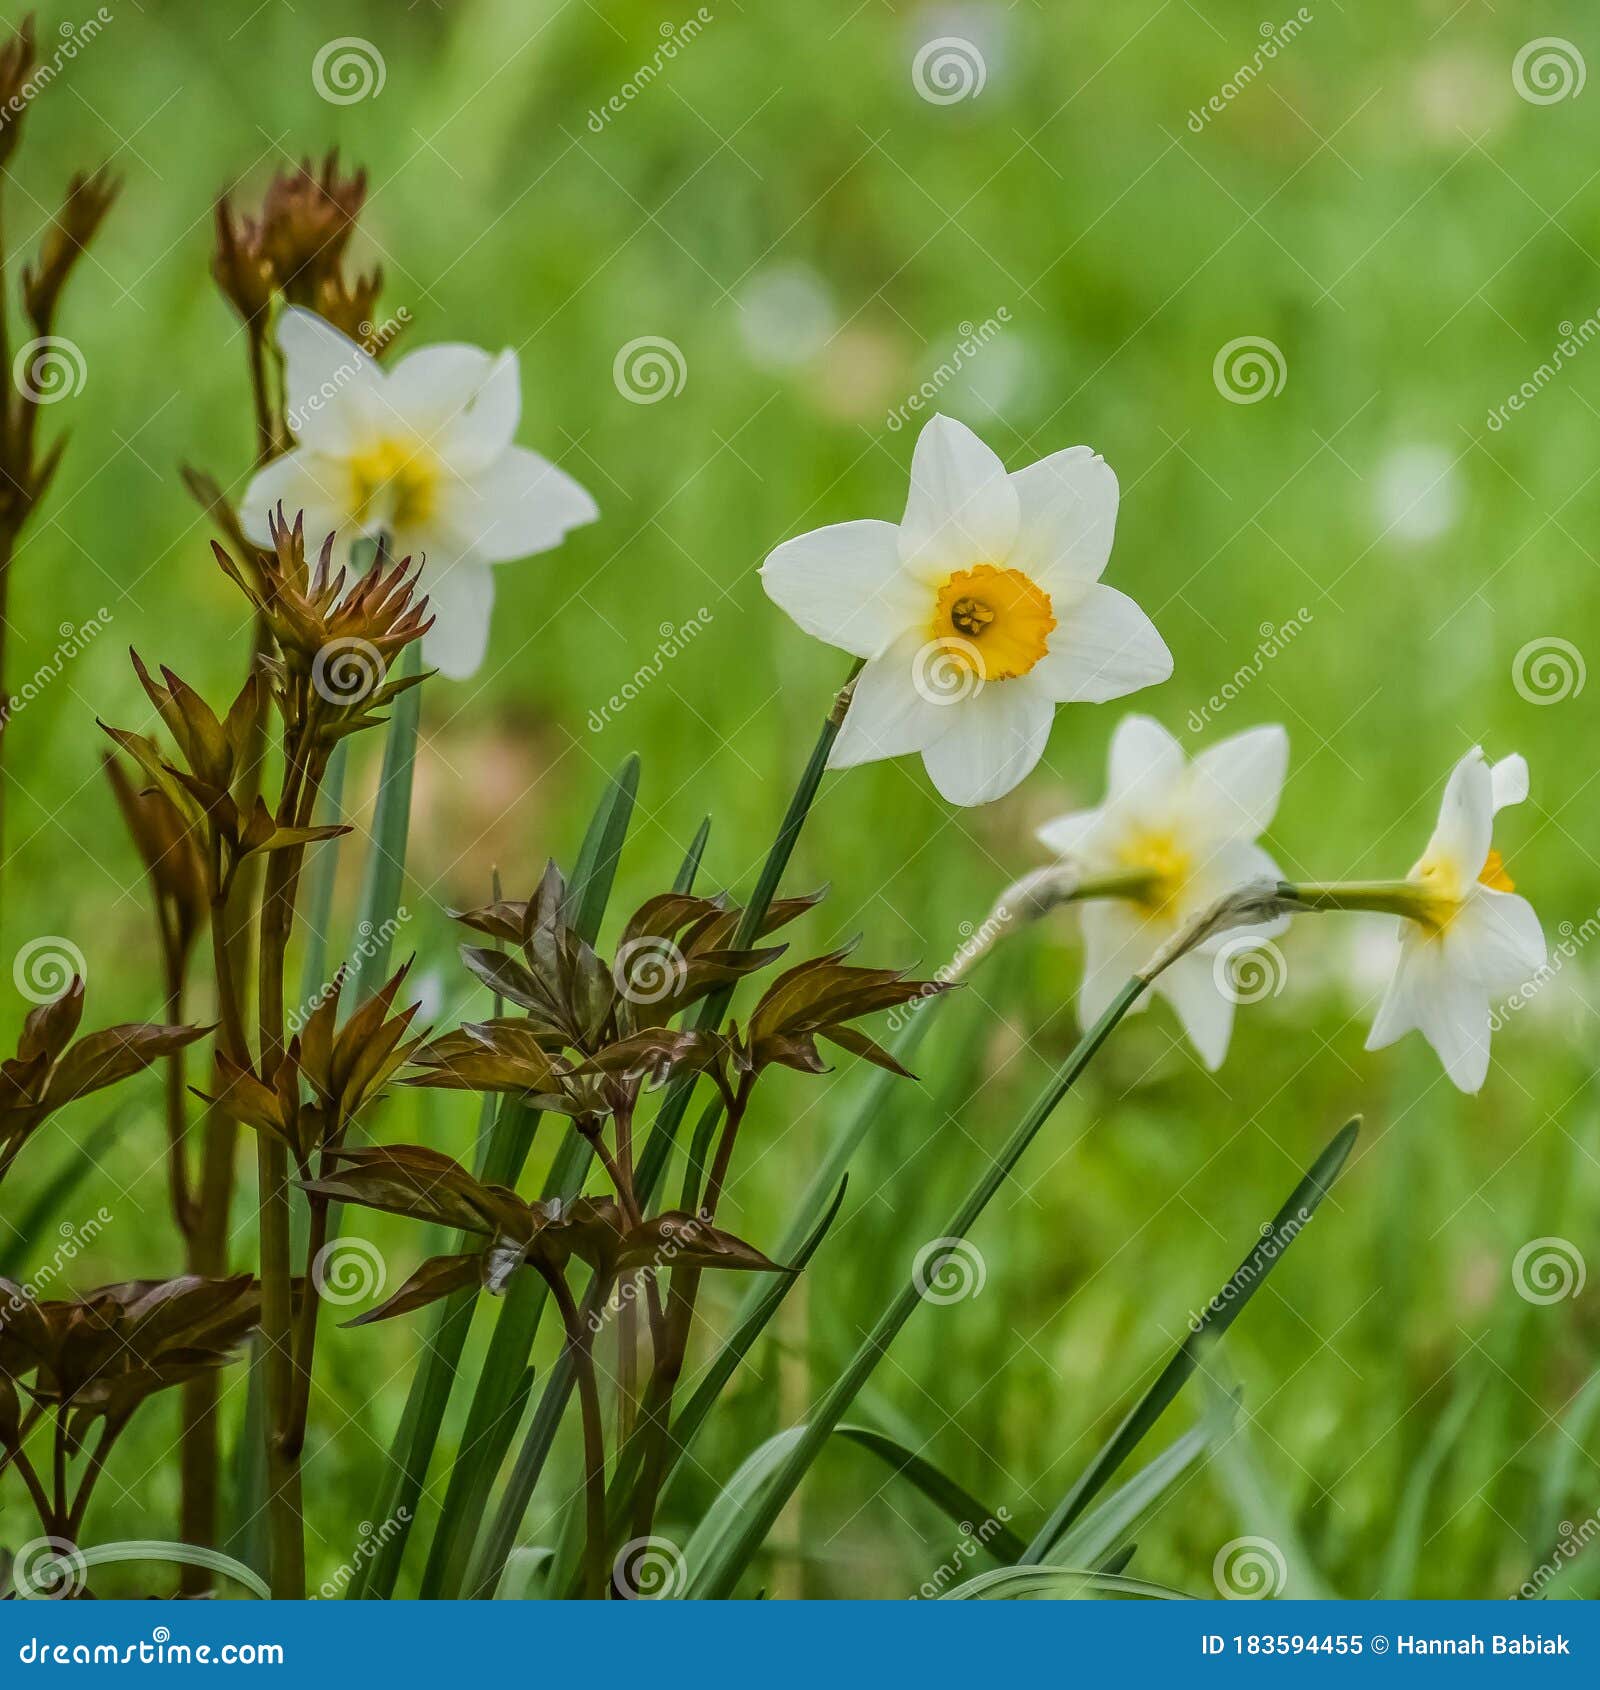 white daffodils with yellow centers